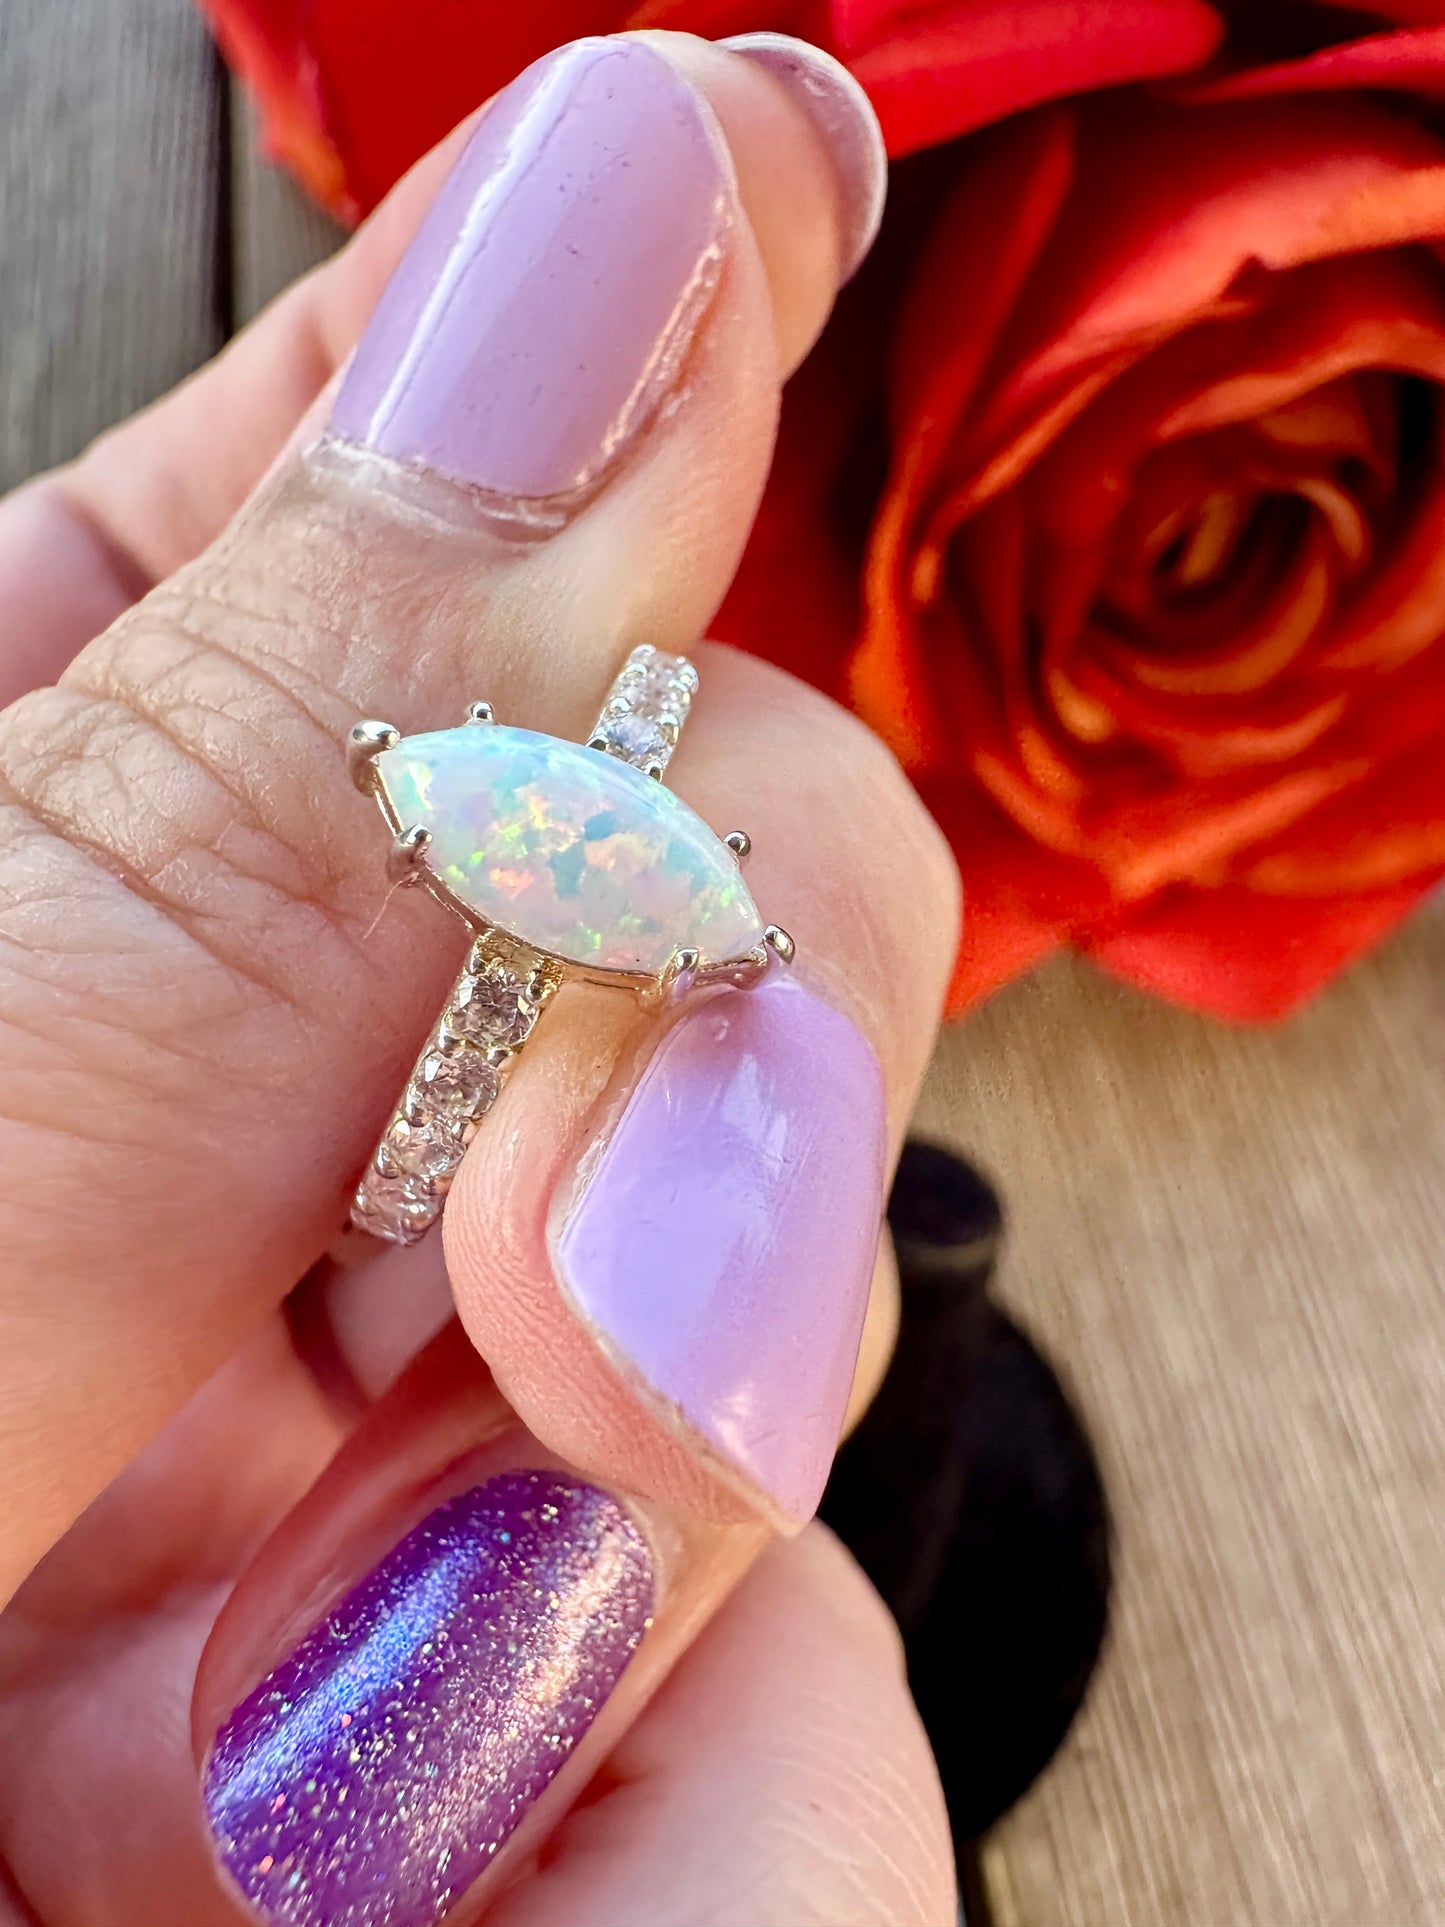 Sterling Silver Opal Ring - Size 5.75, Elegant Handcrafted Jewelry, Unique Fire Opal Engagement Ring, Dainty Feminine Fashion Accessory